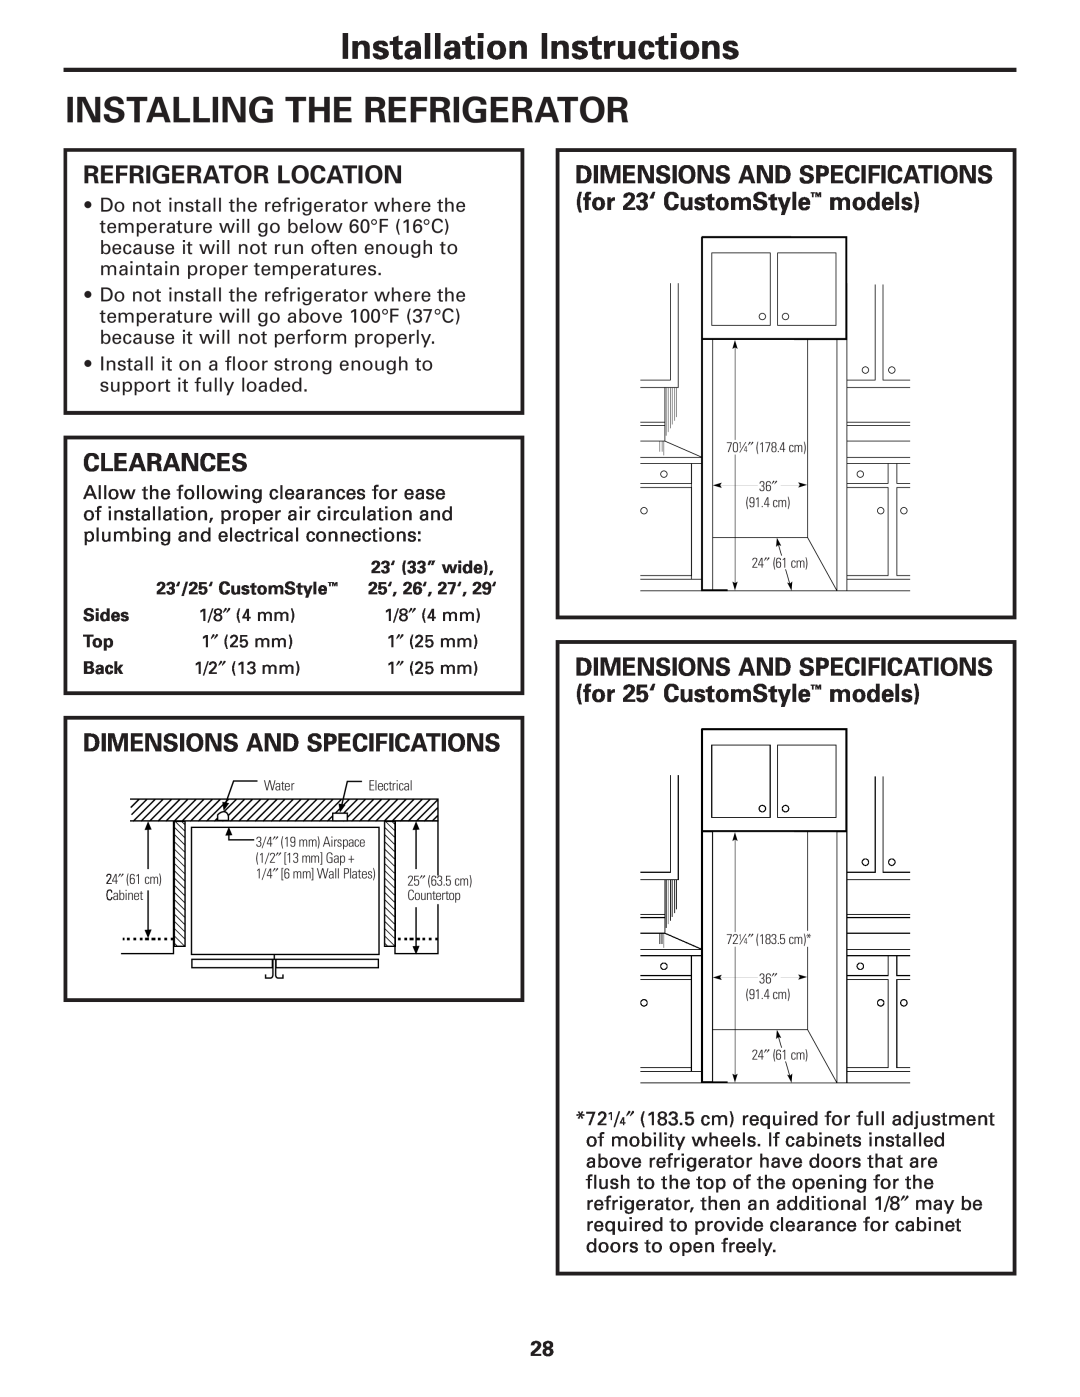 GE 200D8074P017 Installation Instructions INSTALLING THE REFRIGERATOR, Refrigerator Location, Clearances 